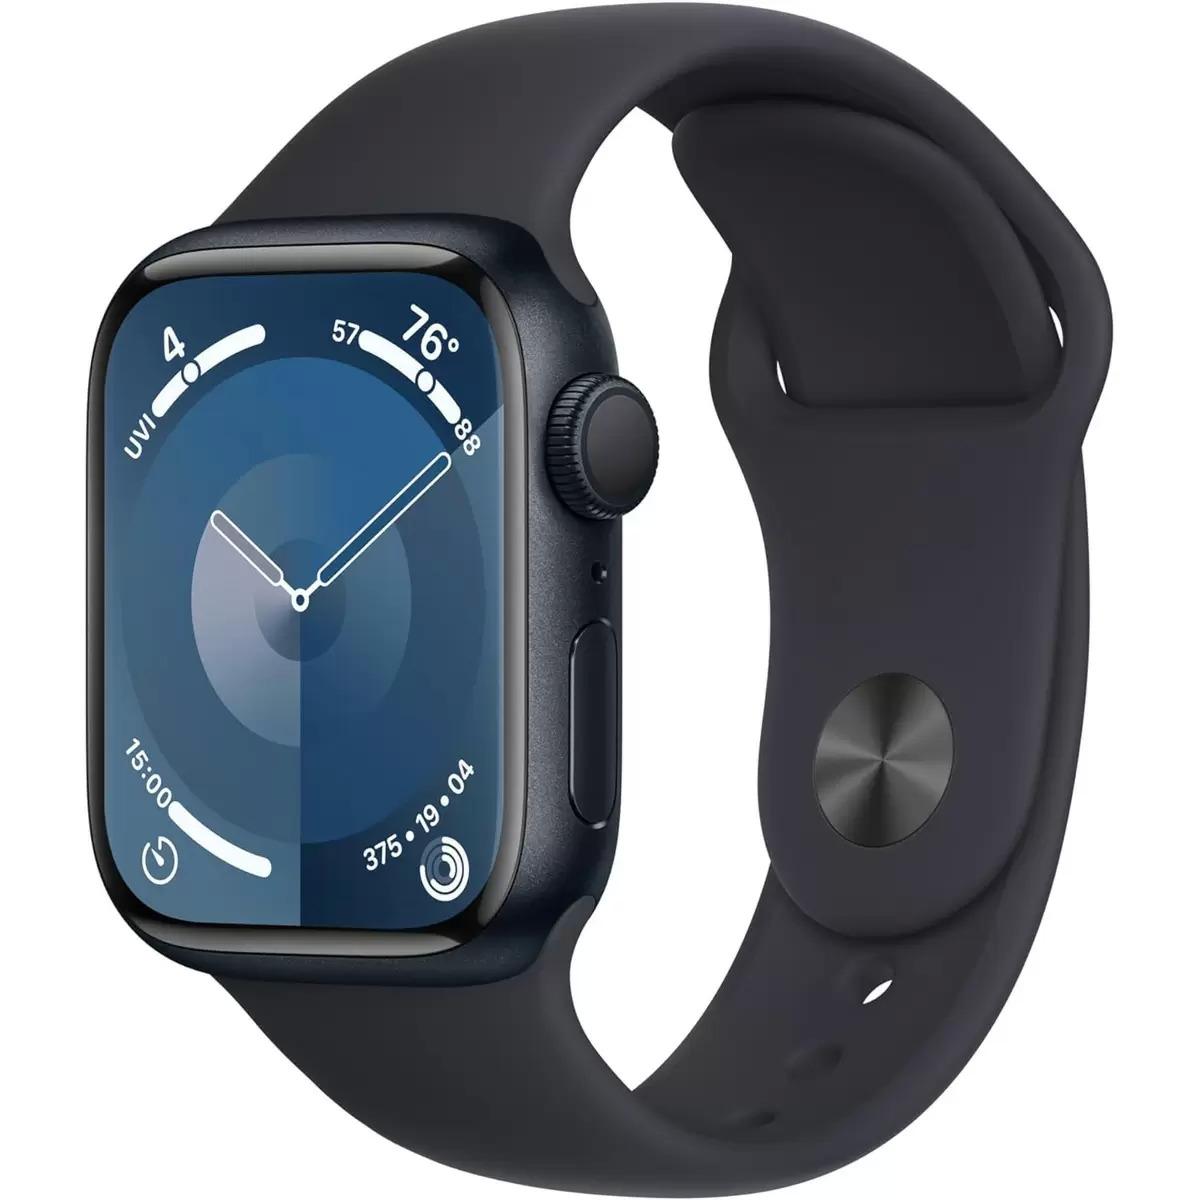 New 2023 Apple Watch Series 9 GPS Smartwatch for $349 Shipped